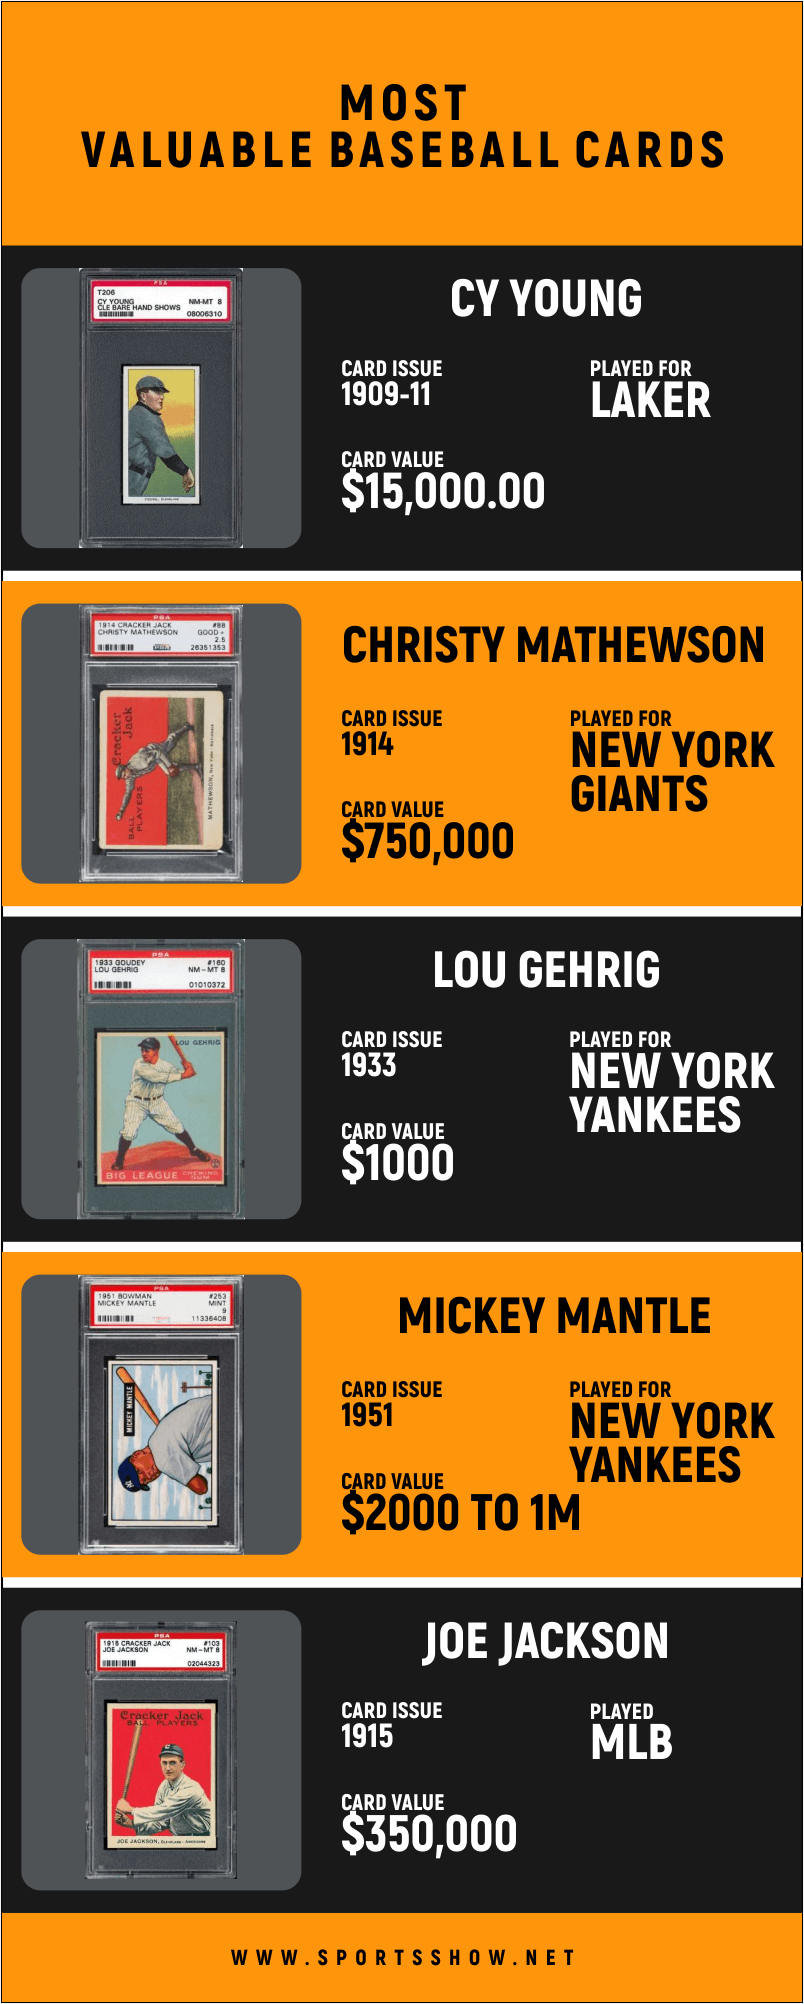 Top 10 Most Valuable Baseball Cards Of All Time